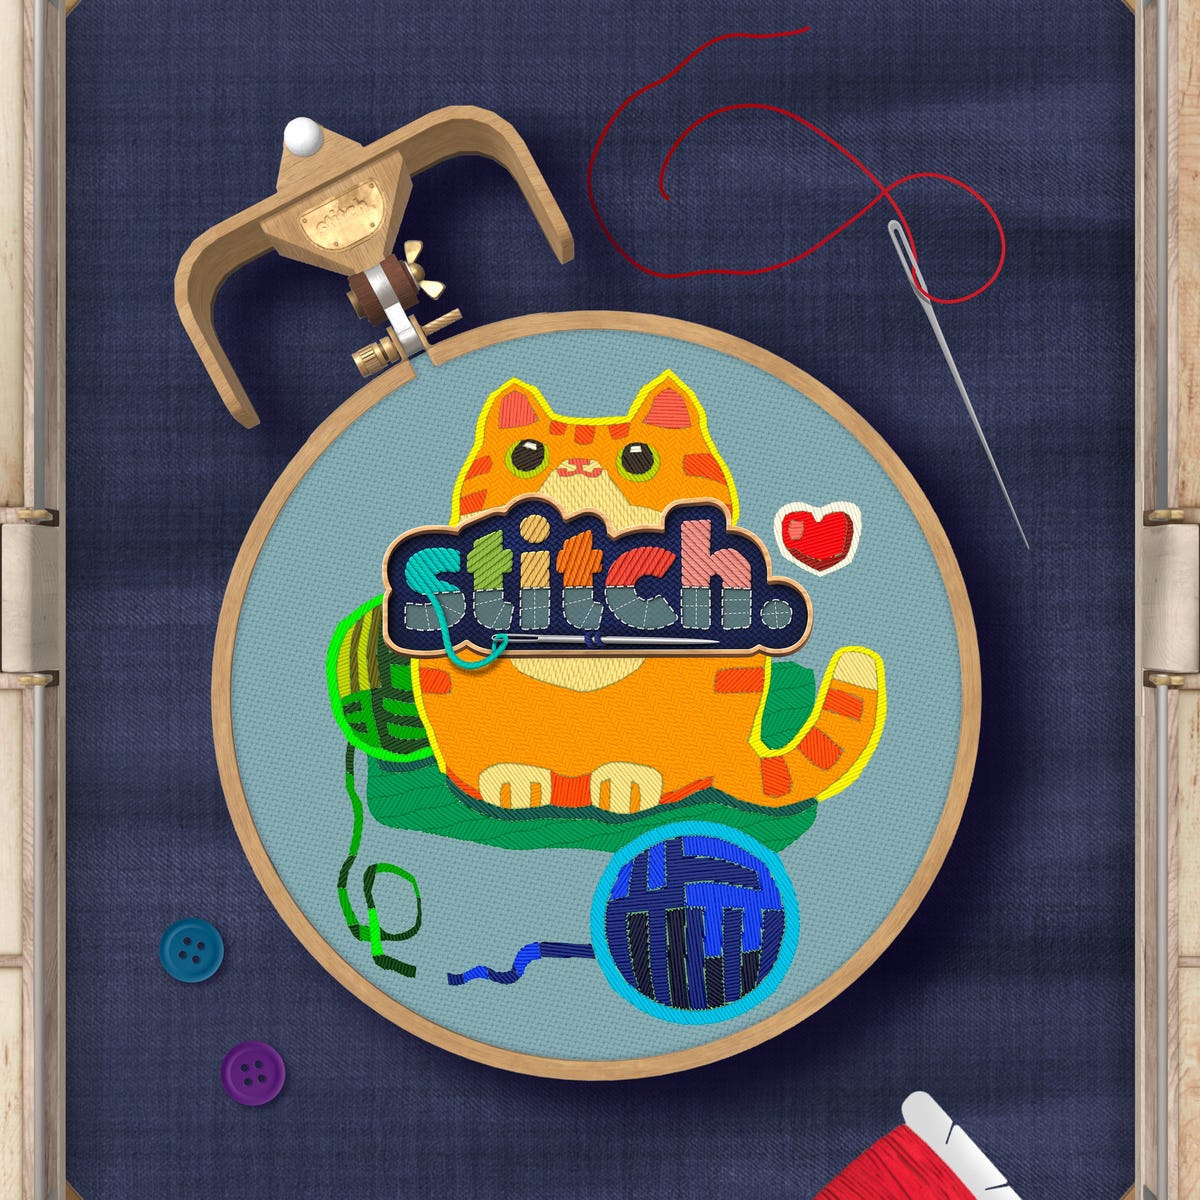 New Relaxing Embroidery Puzzle Game Stitch Available on Apple Arcade - CNET